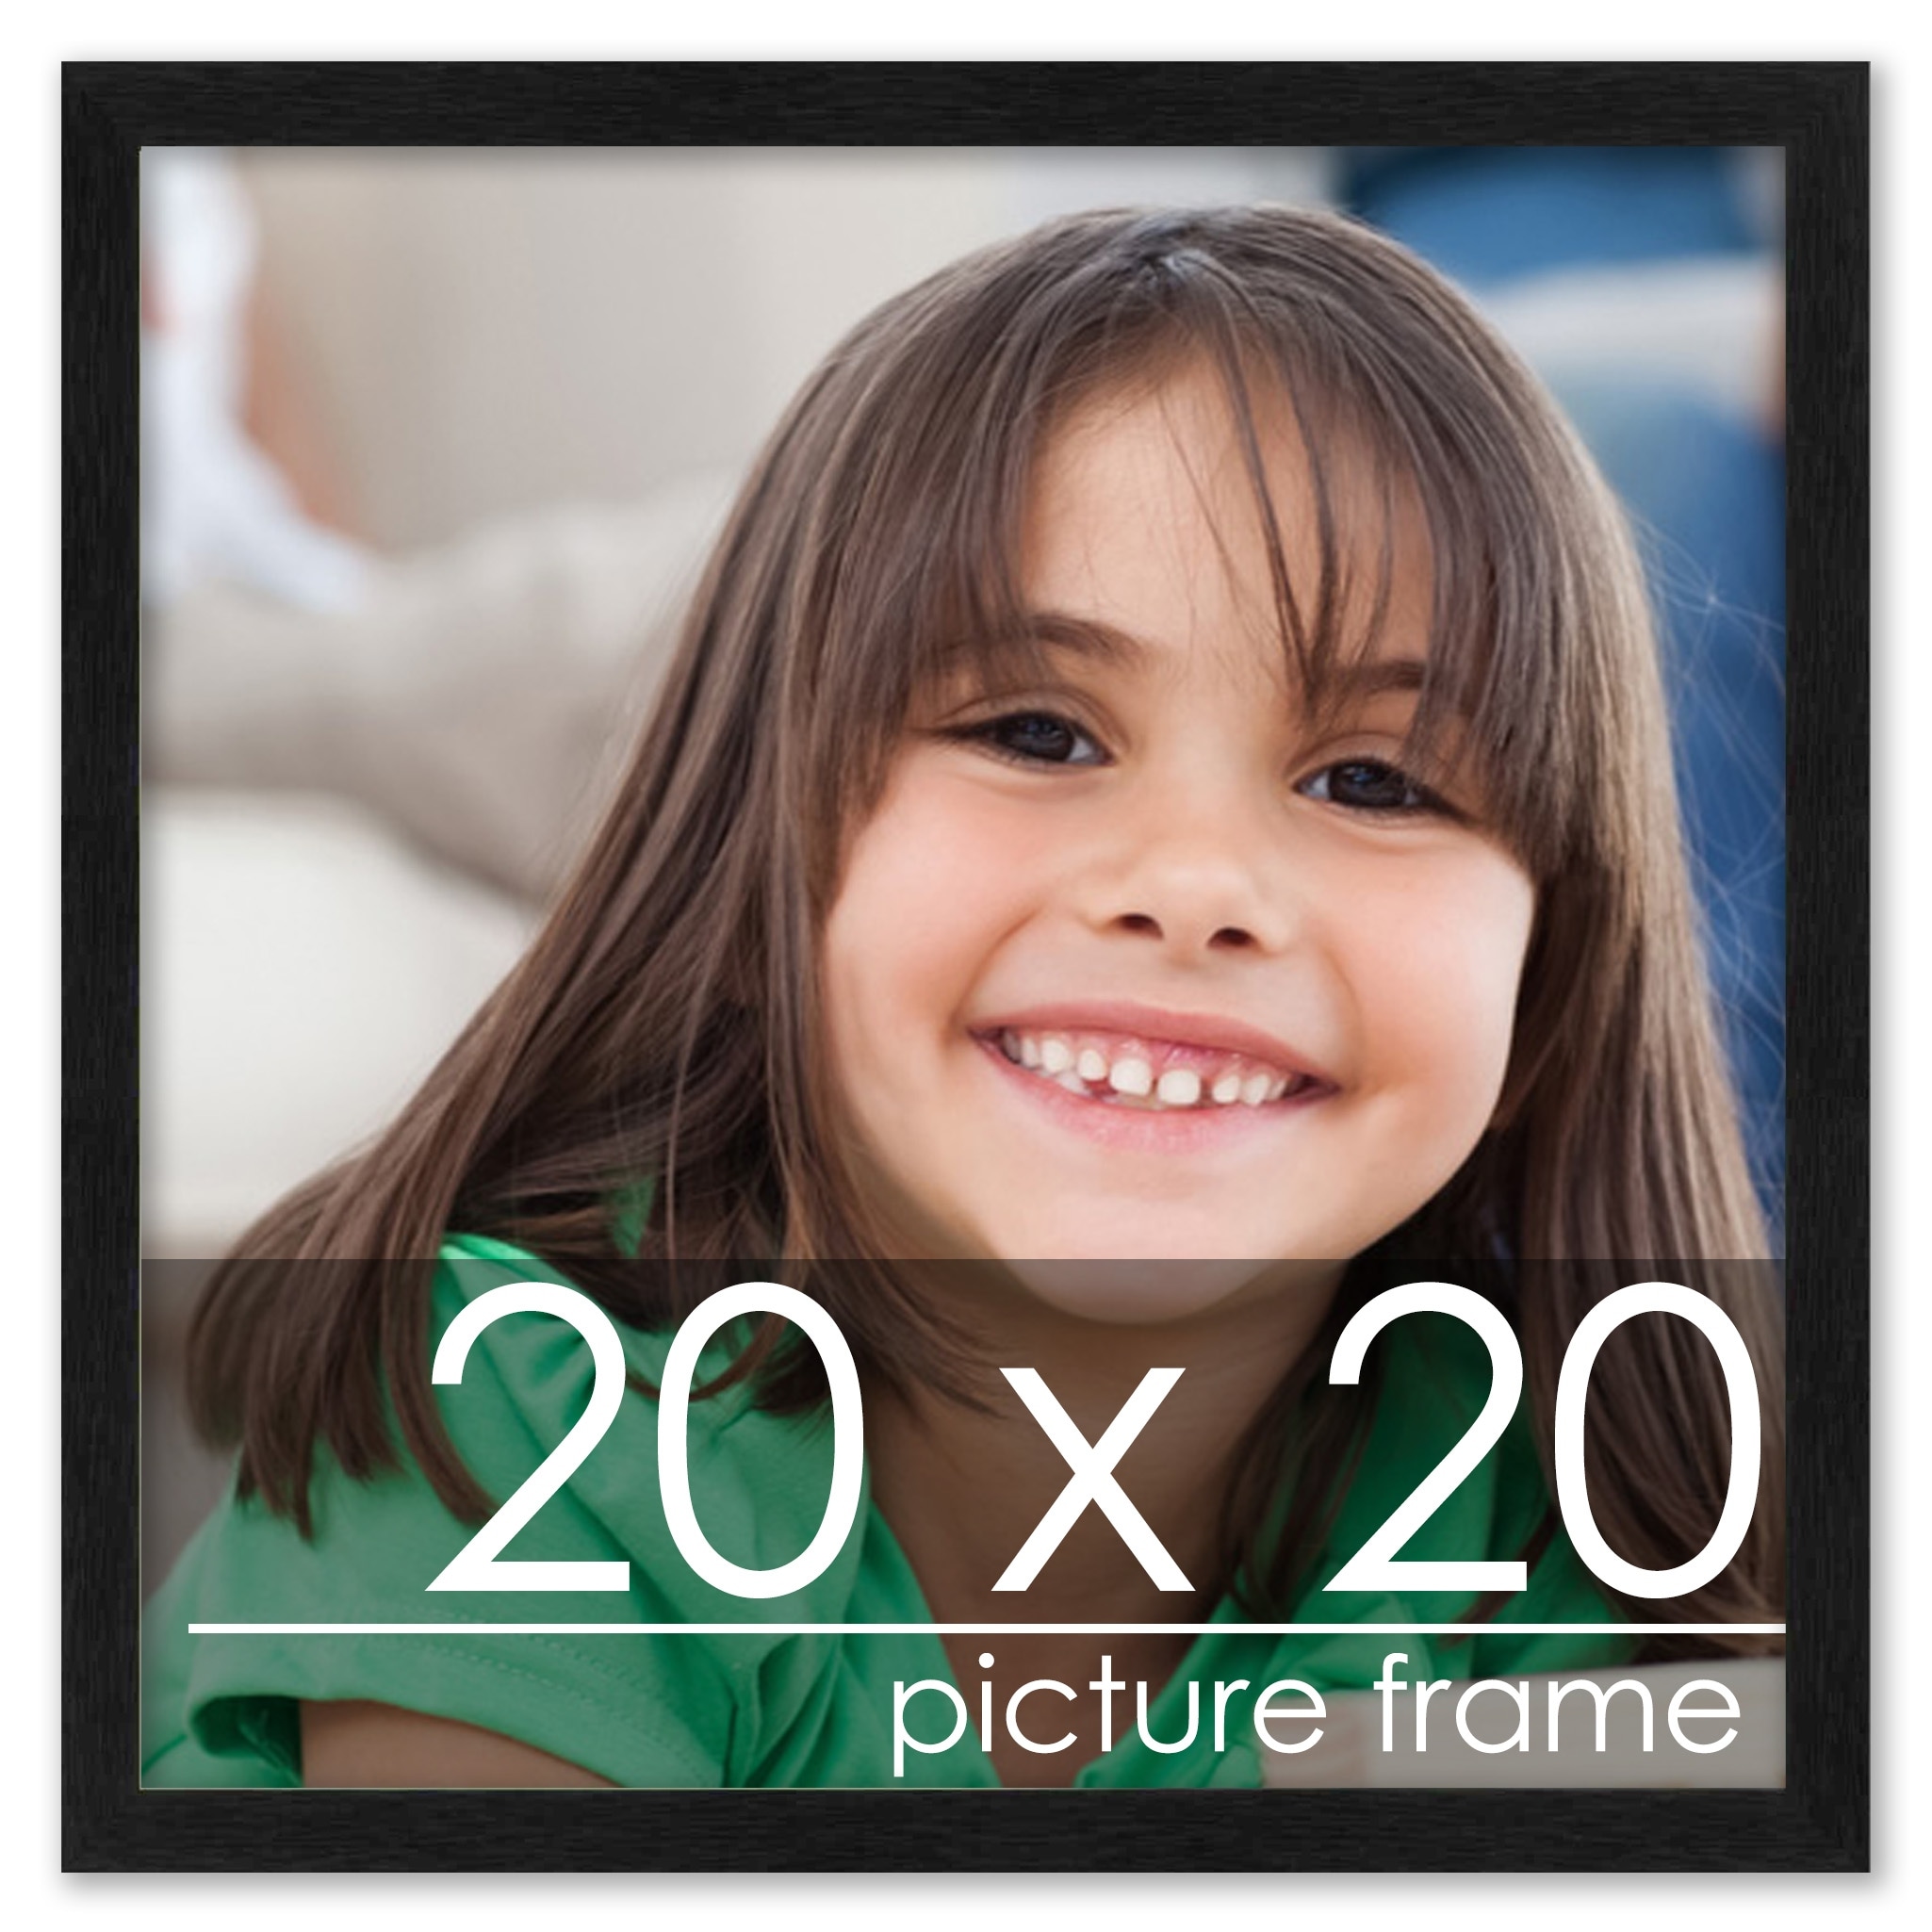 20x20 Contemporary Black Complete Wood Square Picture Frame with UV Acrylic, Foam Board Backing, & Hardware